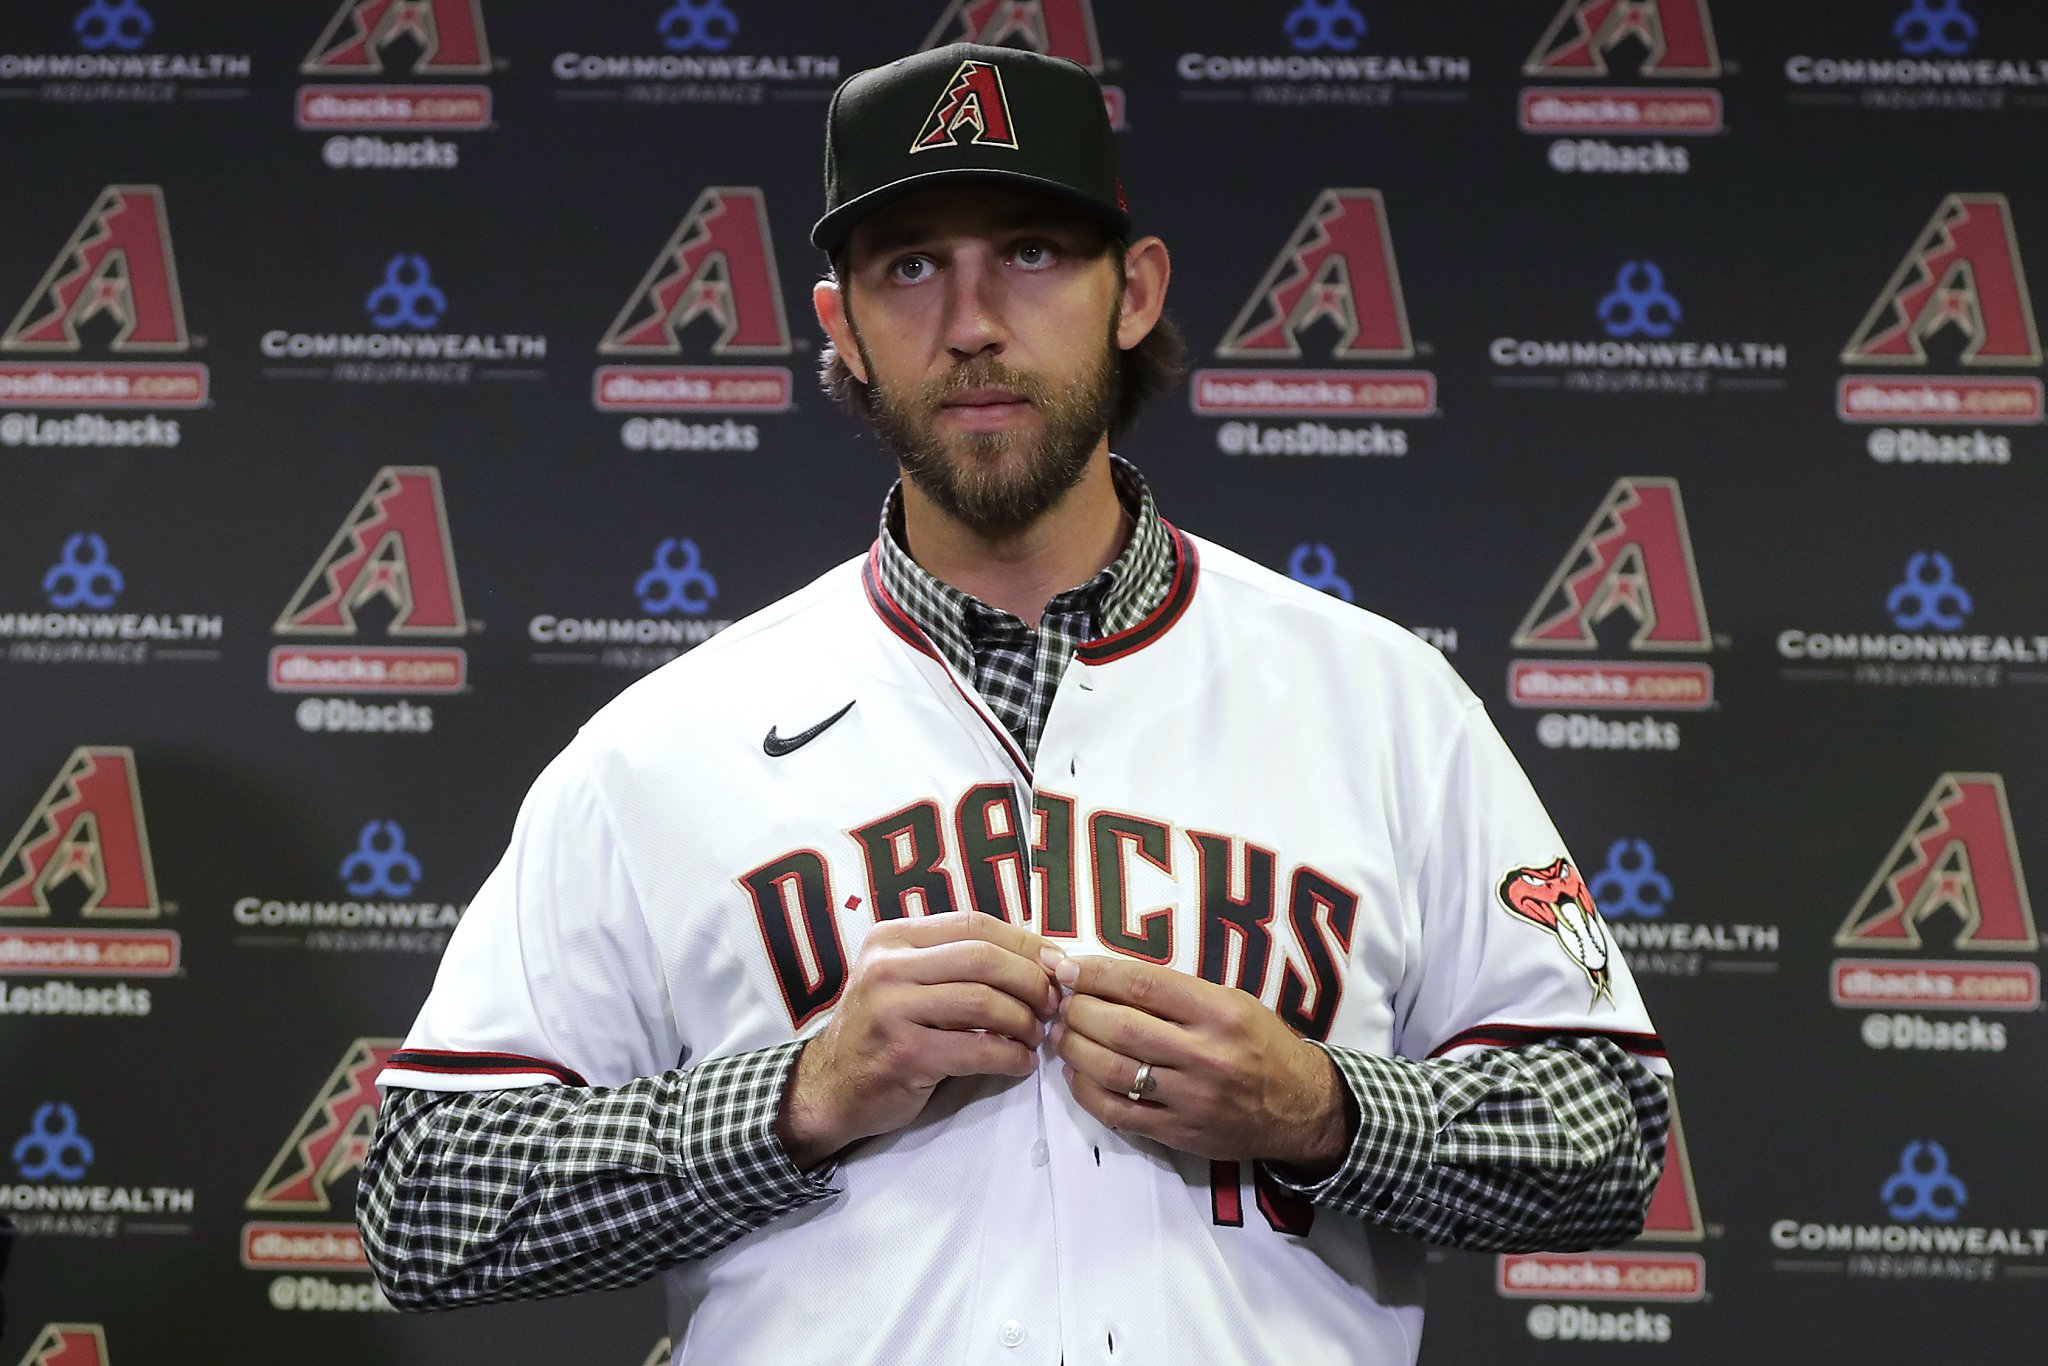 Former Giants star Bumgarner admits competing in rodeos under fake